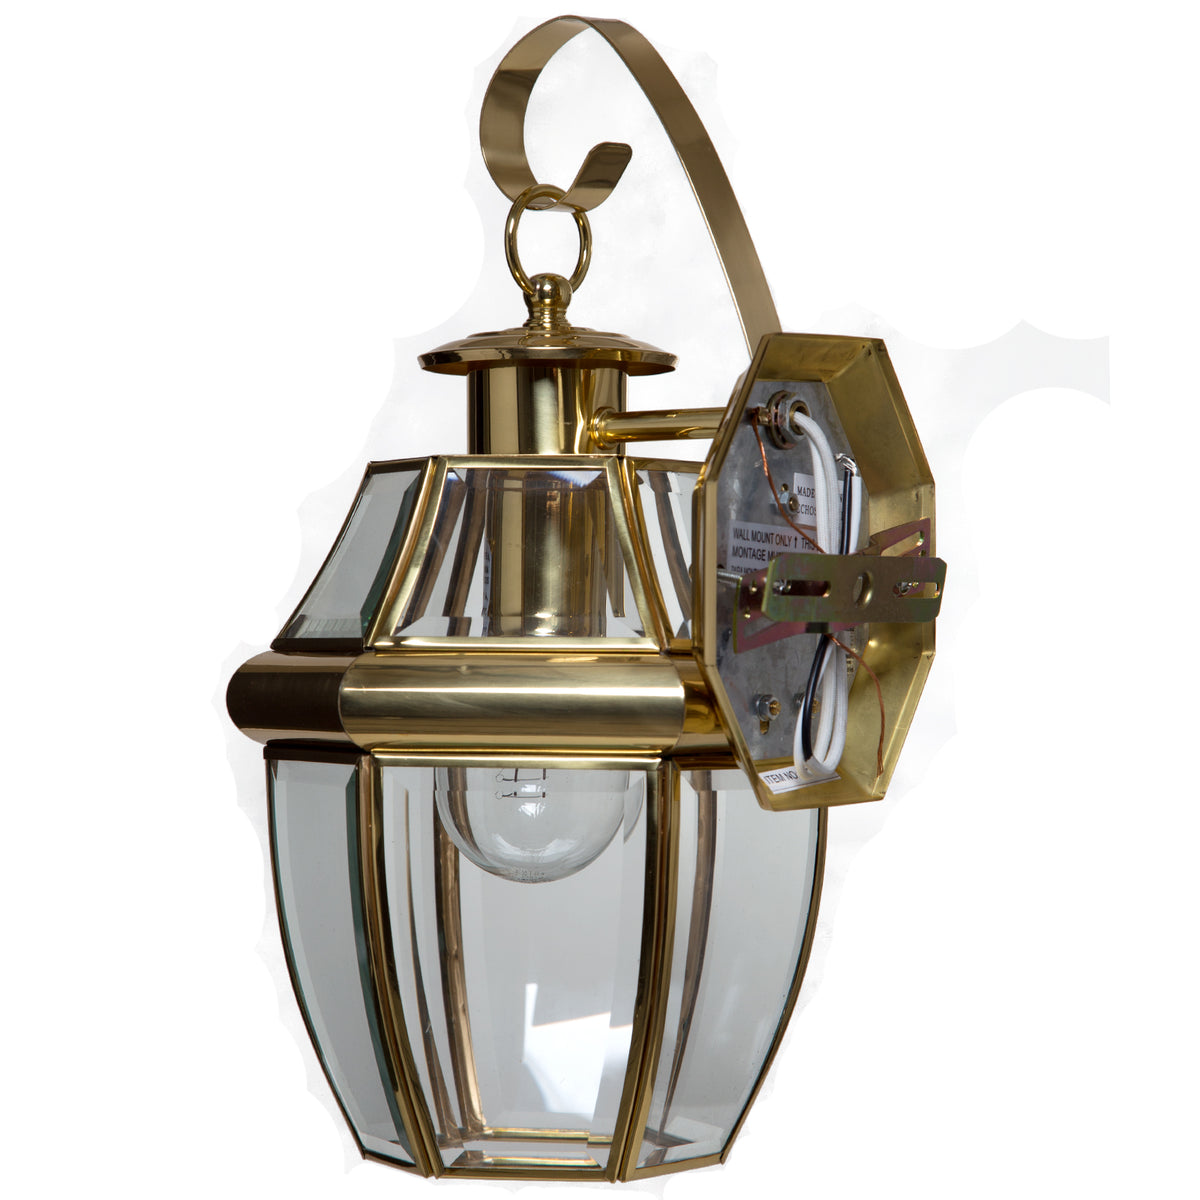 buy wall mount light fixtures at cheap rate in bulk. wholesale & retail lamp supplies store. home décor ideas, maintenance, repair replacement parts